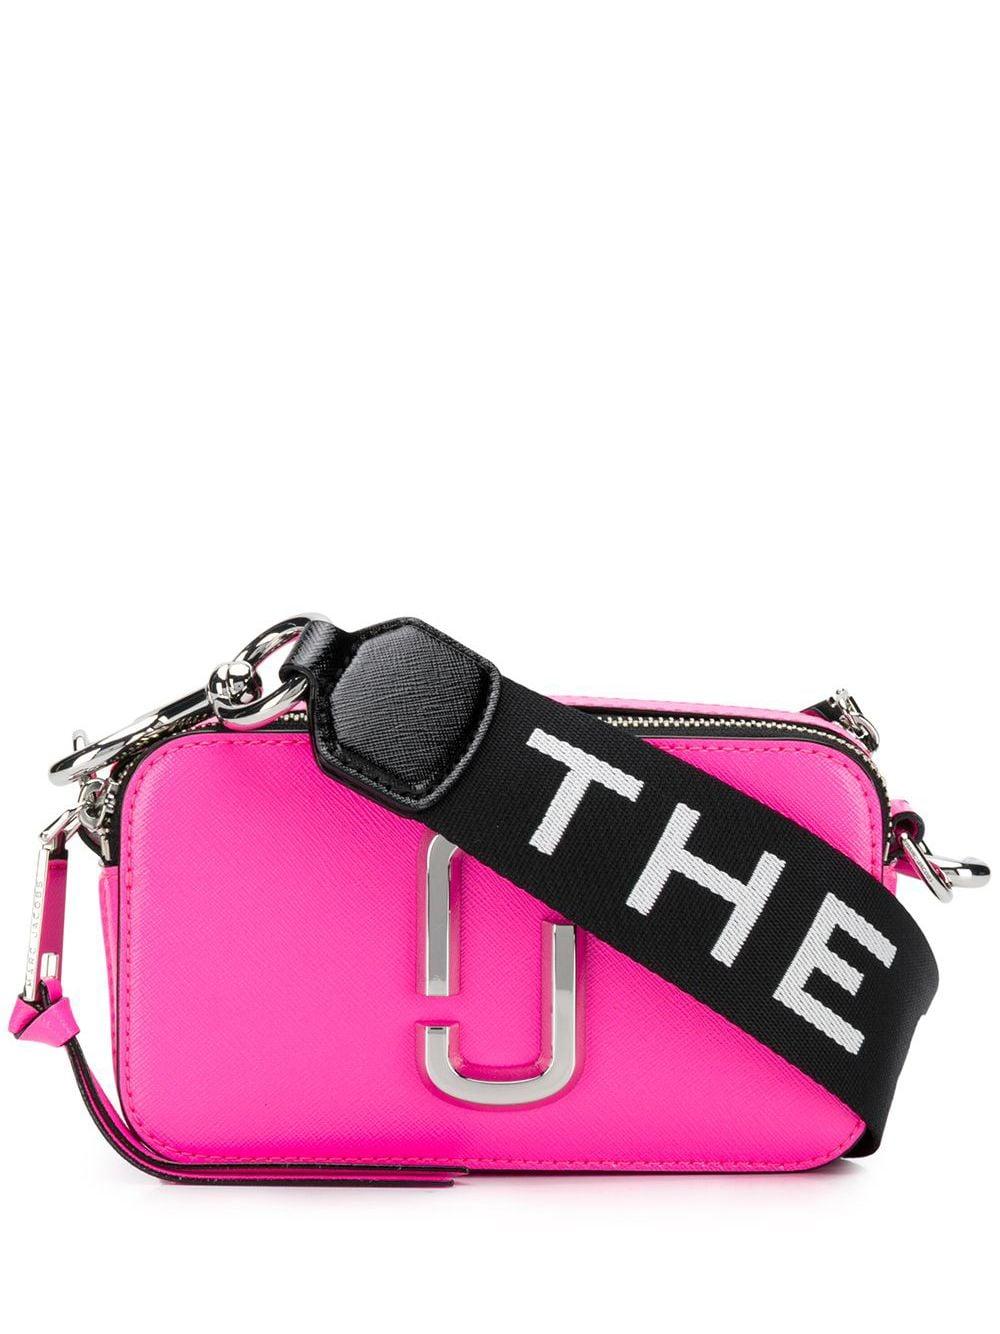 Marc Jacobs Snapshot Camera Bag in Pink | Lyst